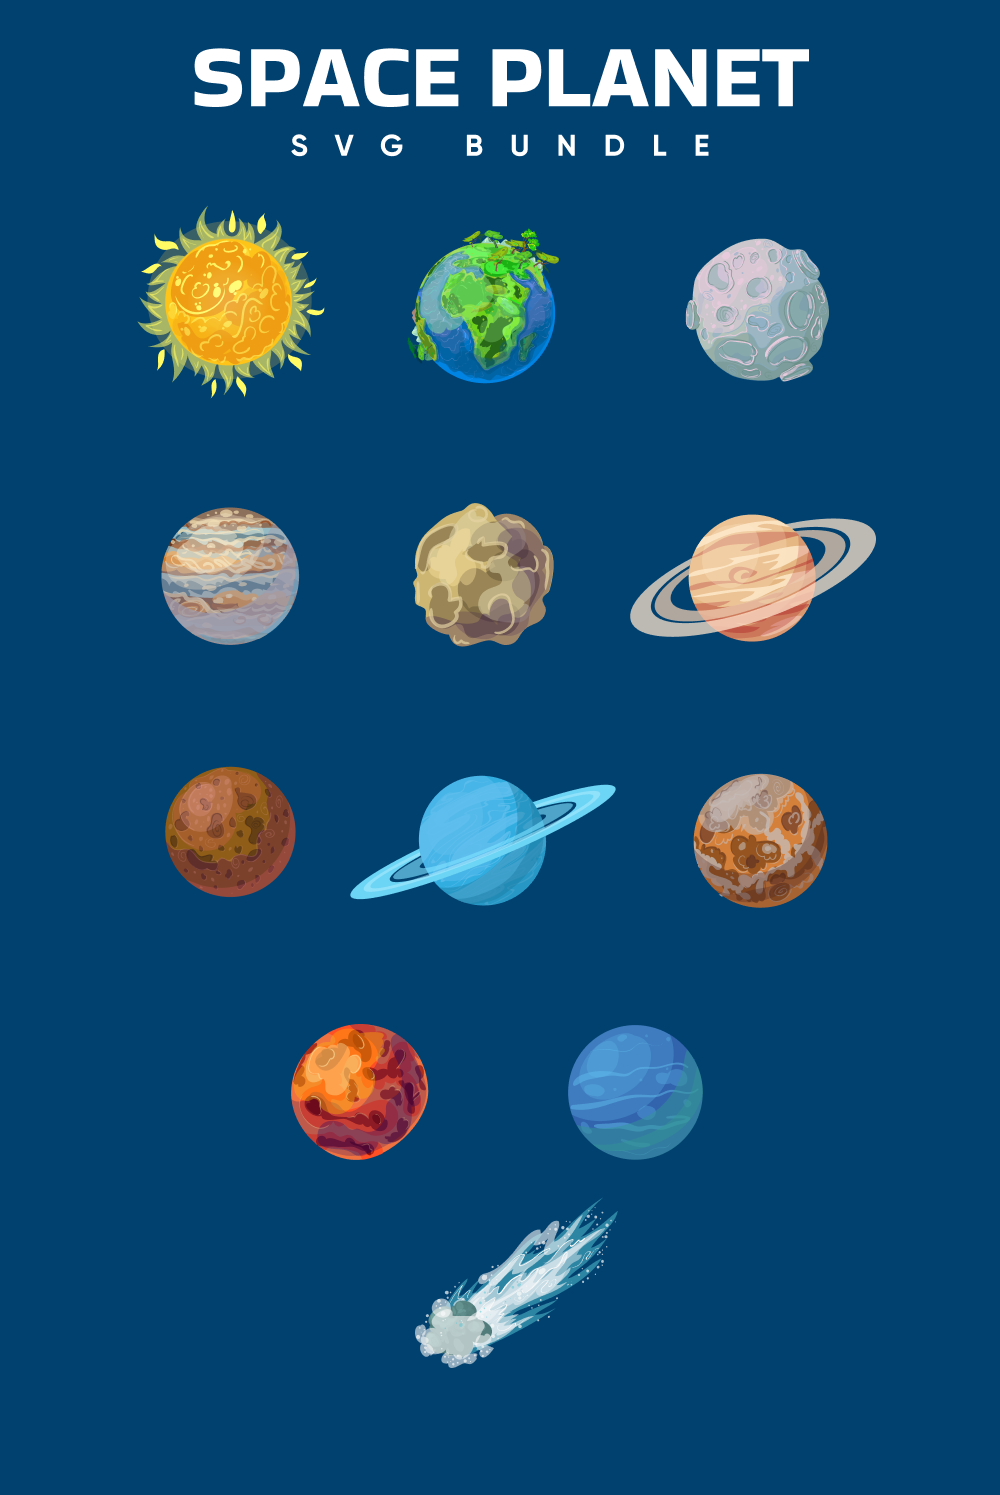 Space planet svg of pinterest.